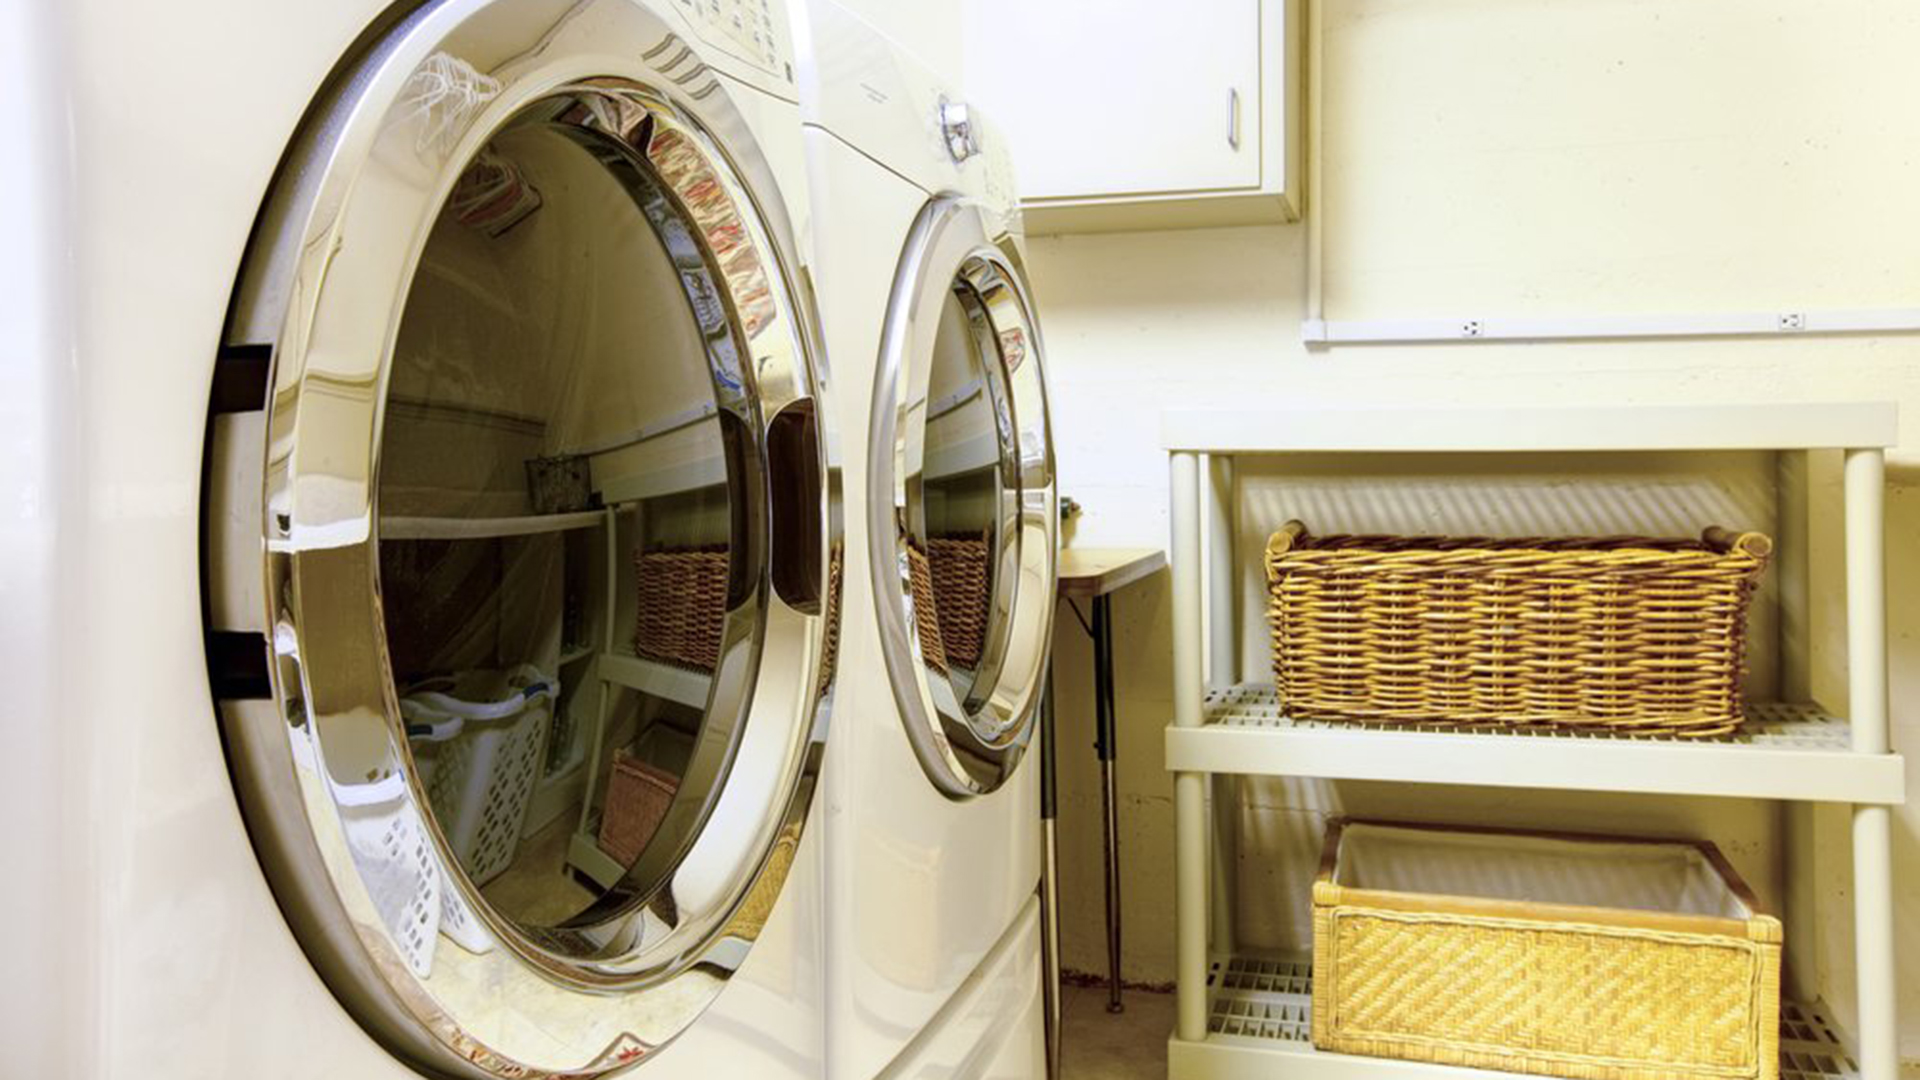 How Long Should Laundry Clothes Be Washed in Washing Machine? — Amenify